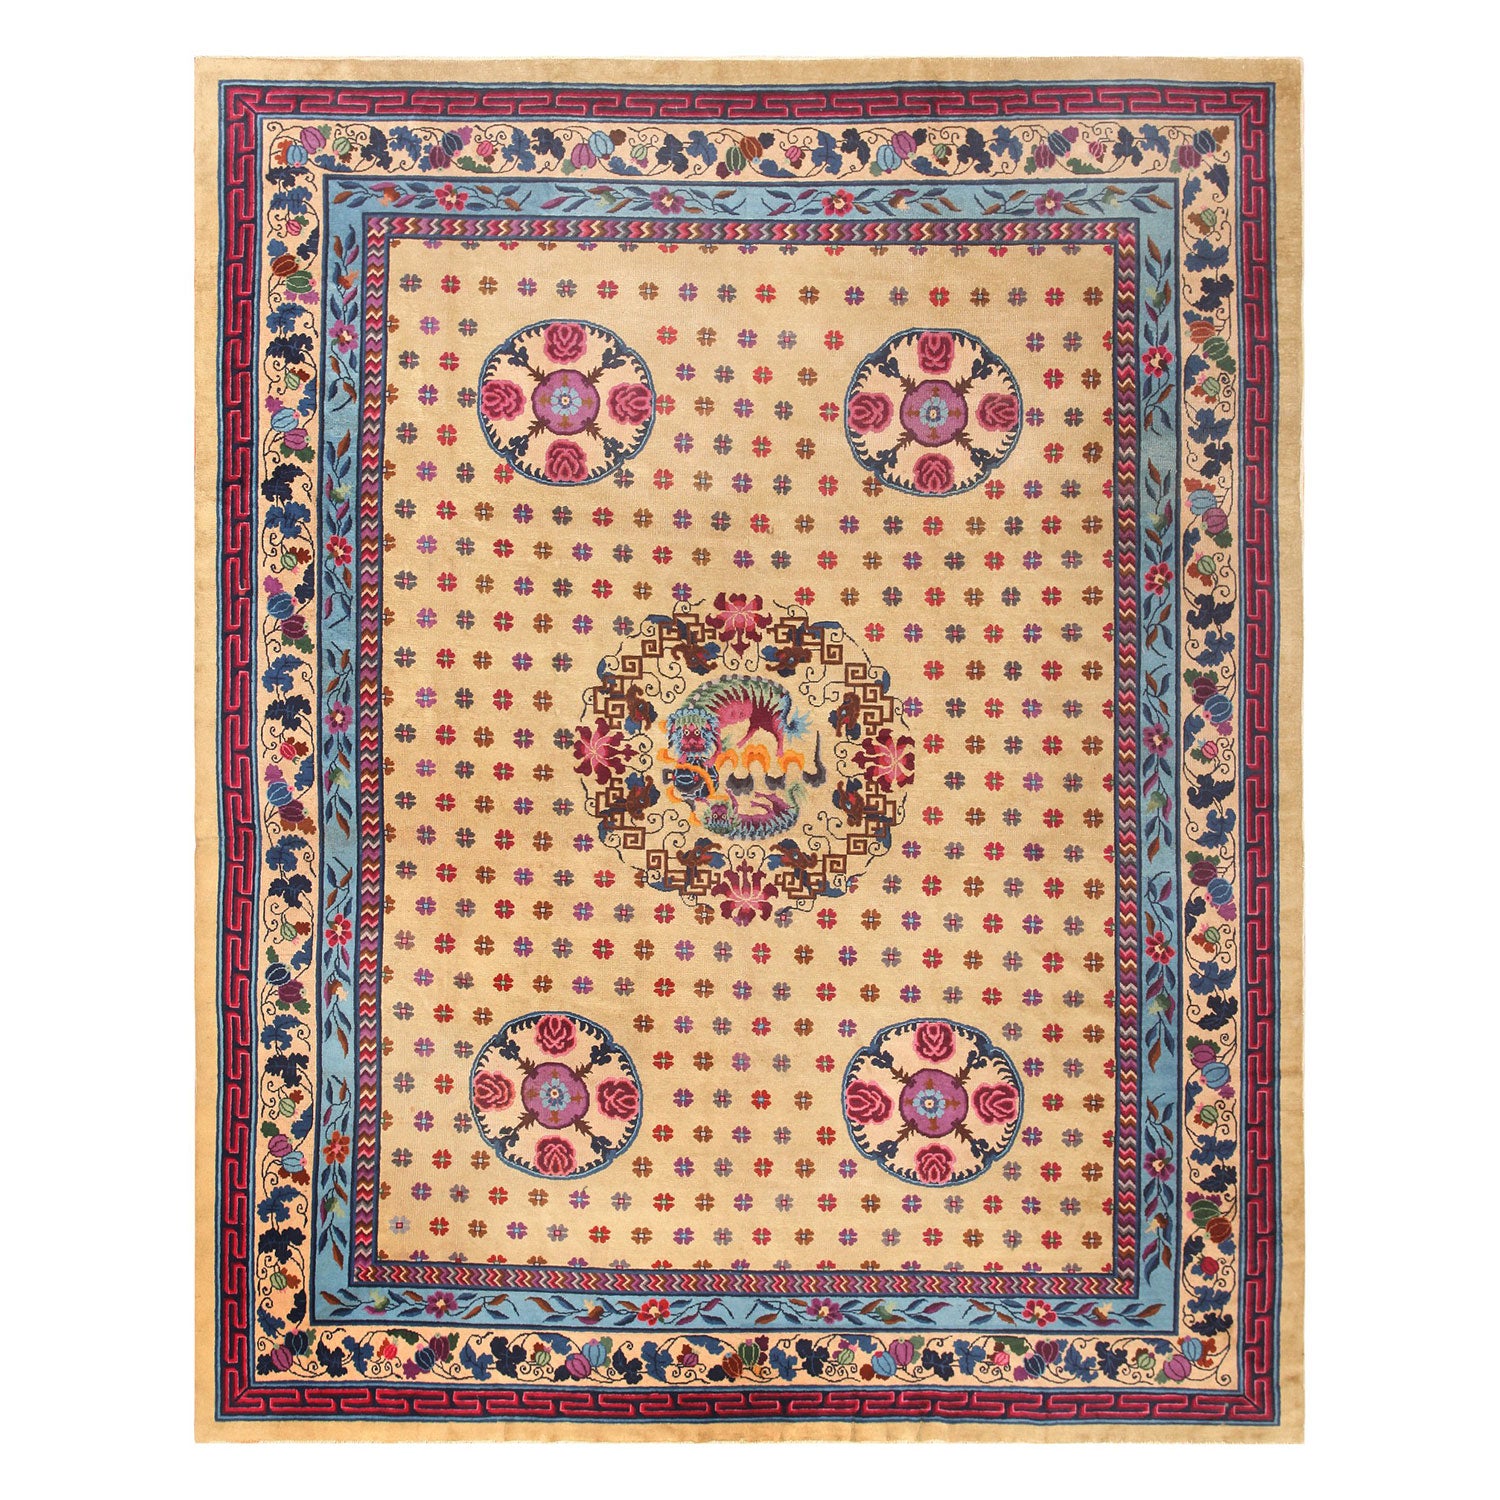 Intricate rug with complex design, multiple borders, and central medallion.